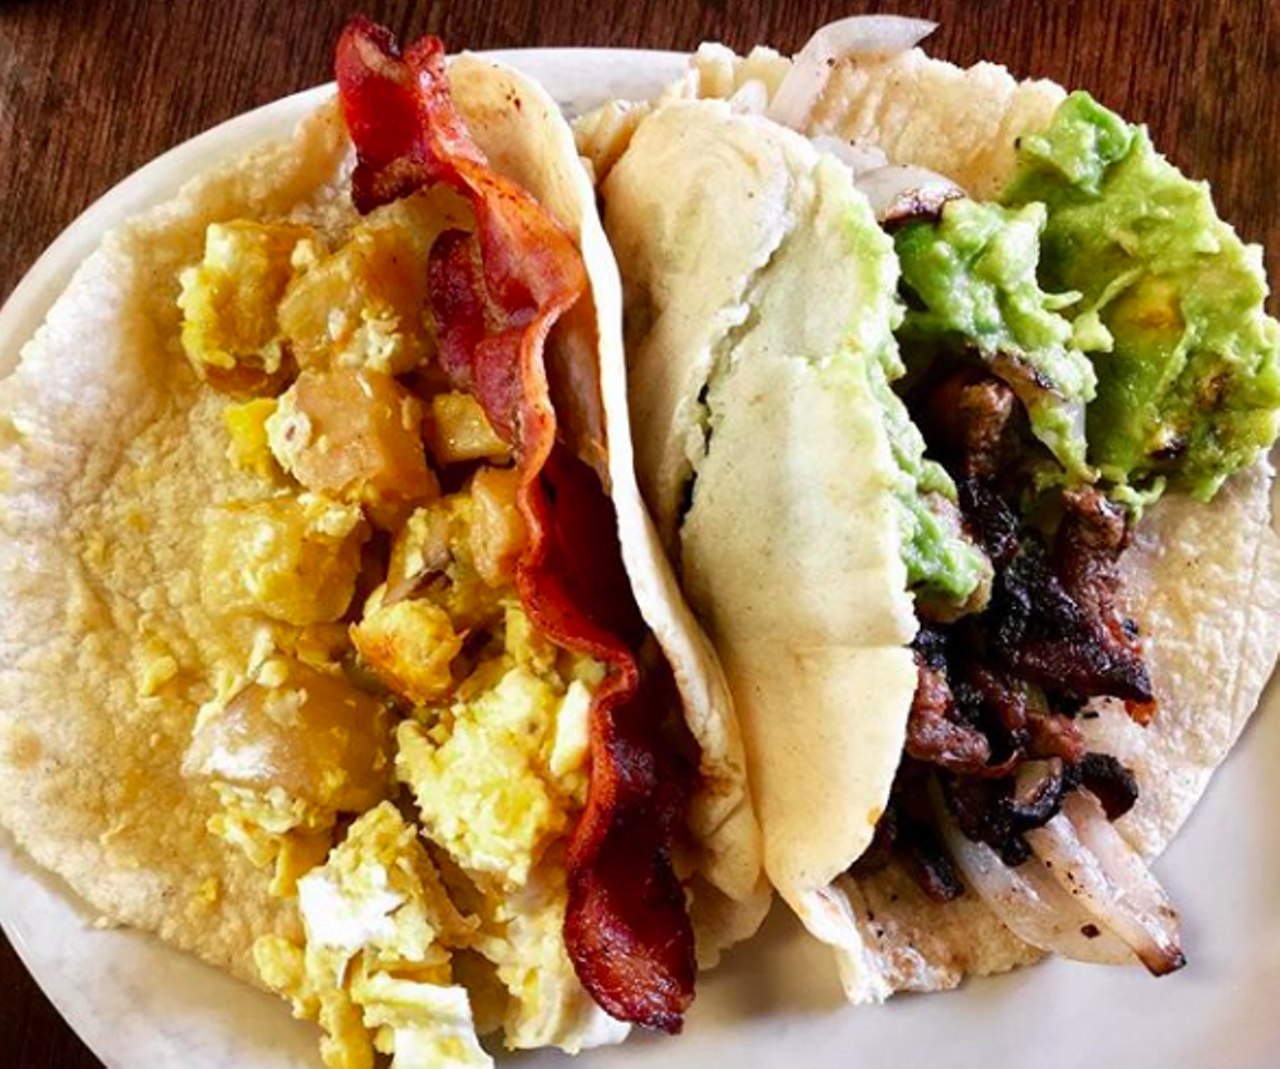 Tia’s Taco Hut
Multiple locations, tiastacohuttx.com
With three locations all outside Loop 410, it’s not hard to score some quality tacos. Popular for breakfast tacos on the weekend, this local chain is dependable for when you need to sober up after a night out on the St. Mary’s Strip.
Photo via Instagram / sanantoniotastebuds